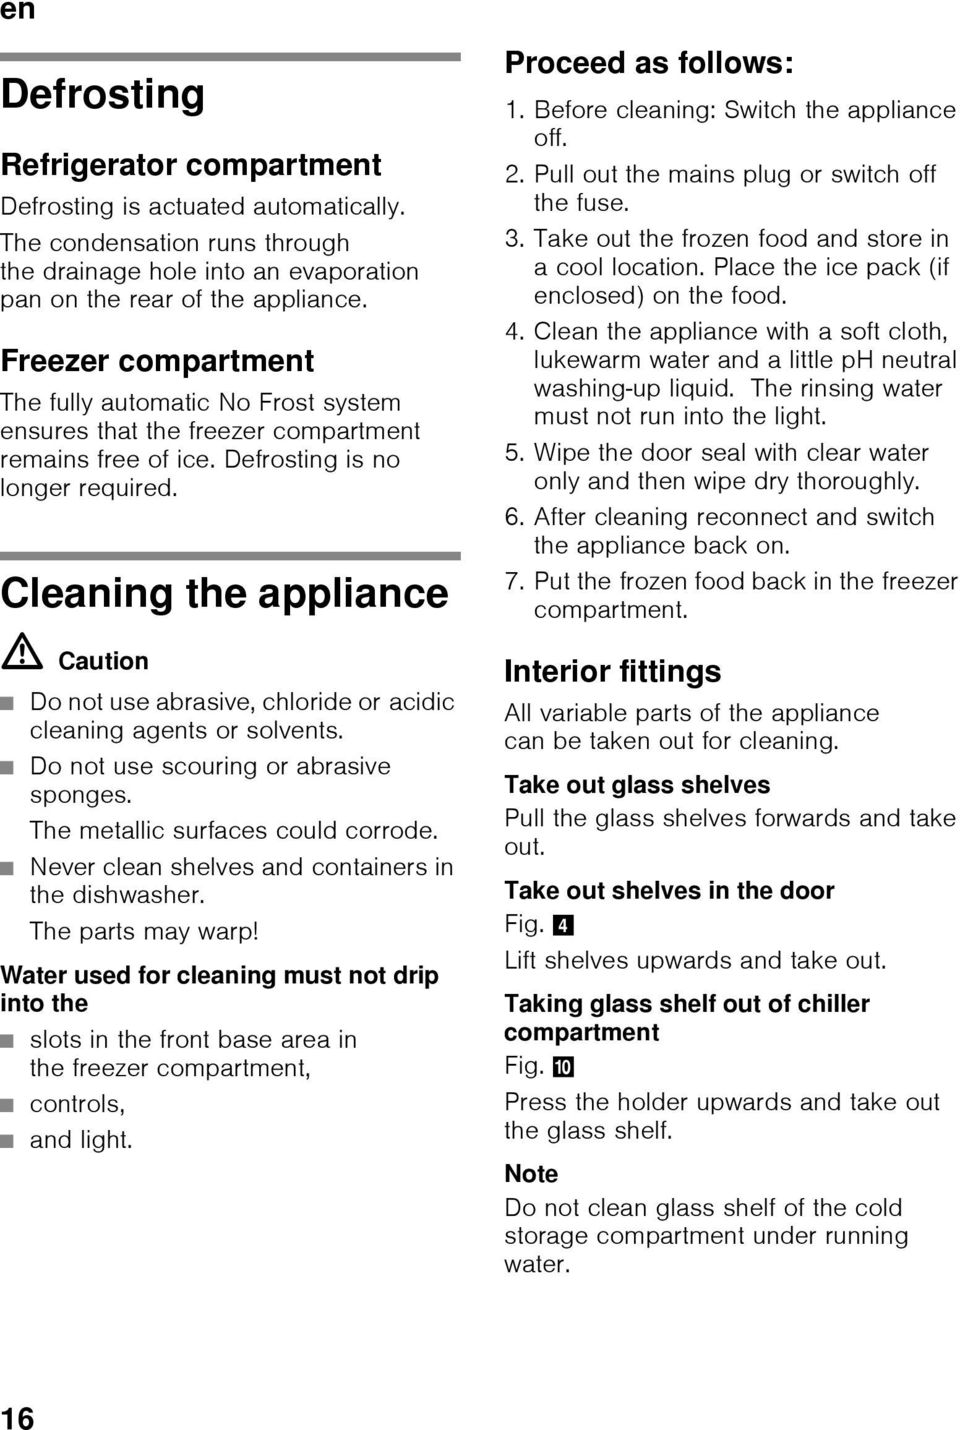 Cleaning the appliance ã=caution Do not use abrasive, chloride or acidic cleaning agents or solvents. Do not use scouring or abrasive sponges. The metallic surfaces could corrode.